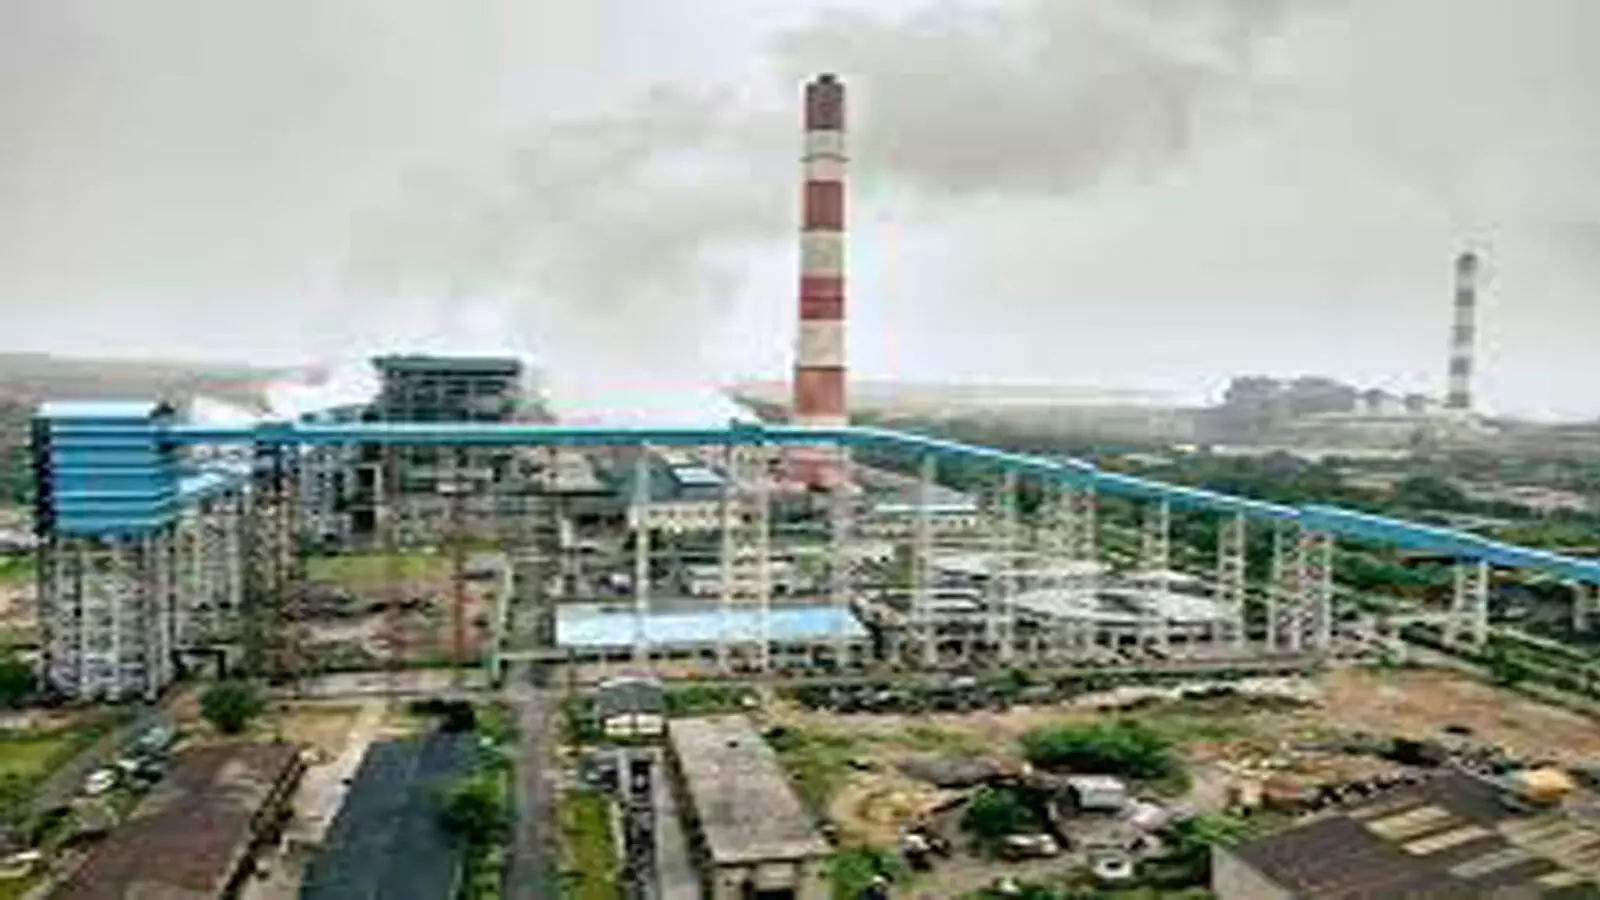 UP: 13 injured after tin shed falls at Lanco thermal plant in Sonbhadra